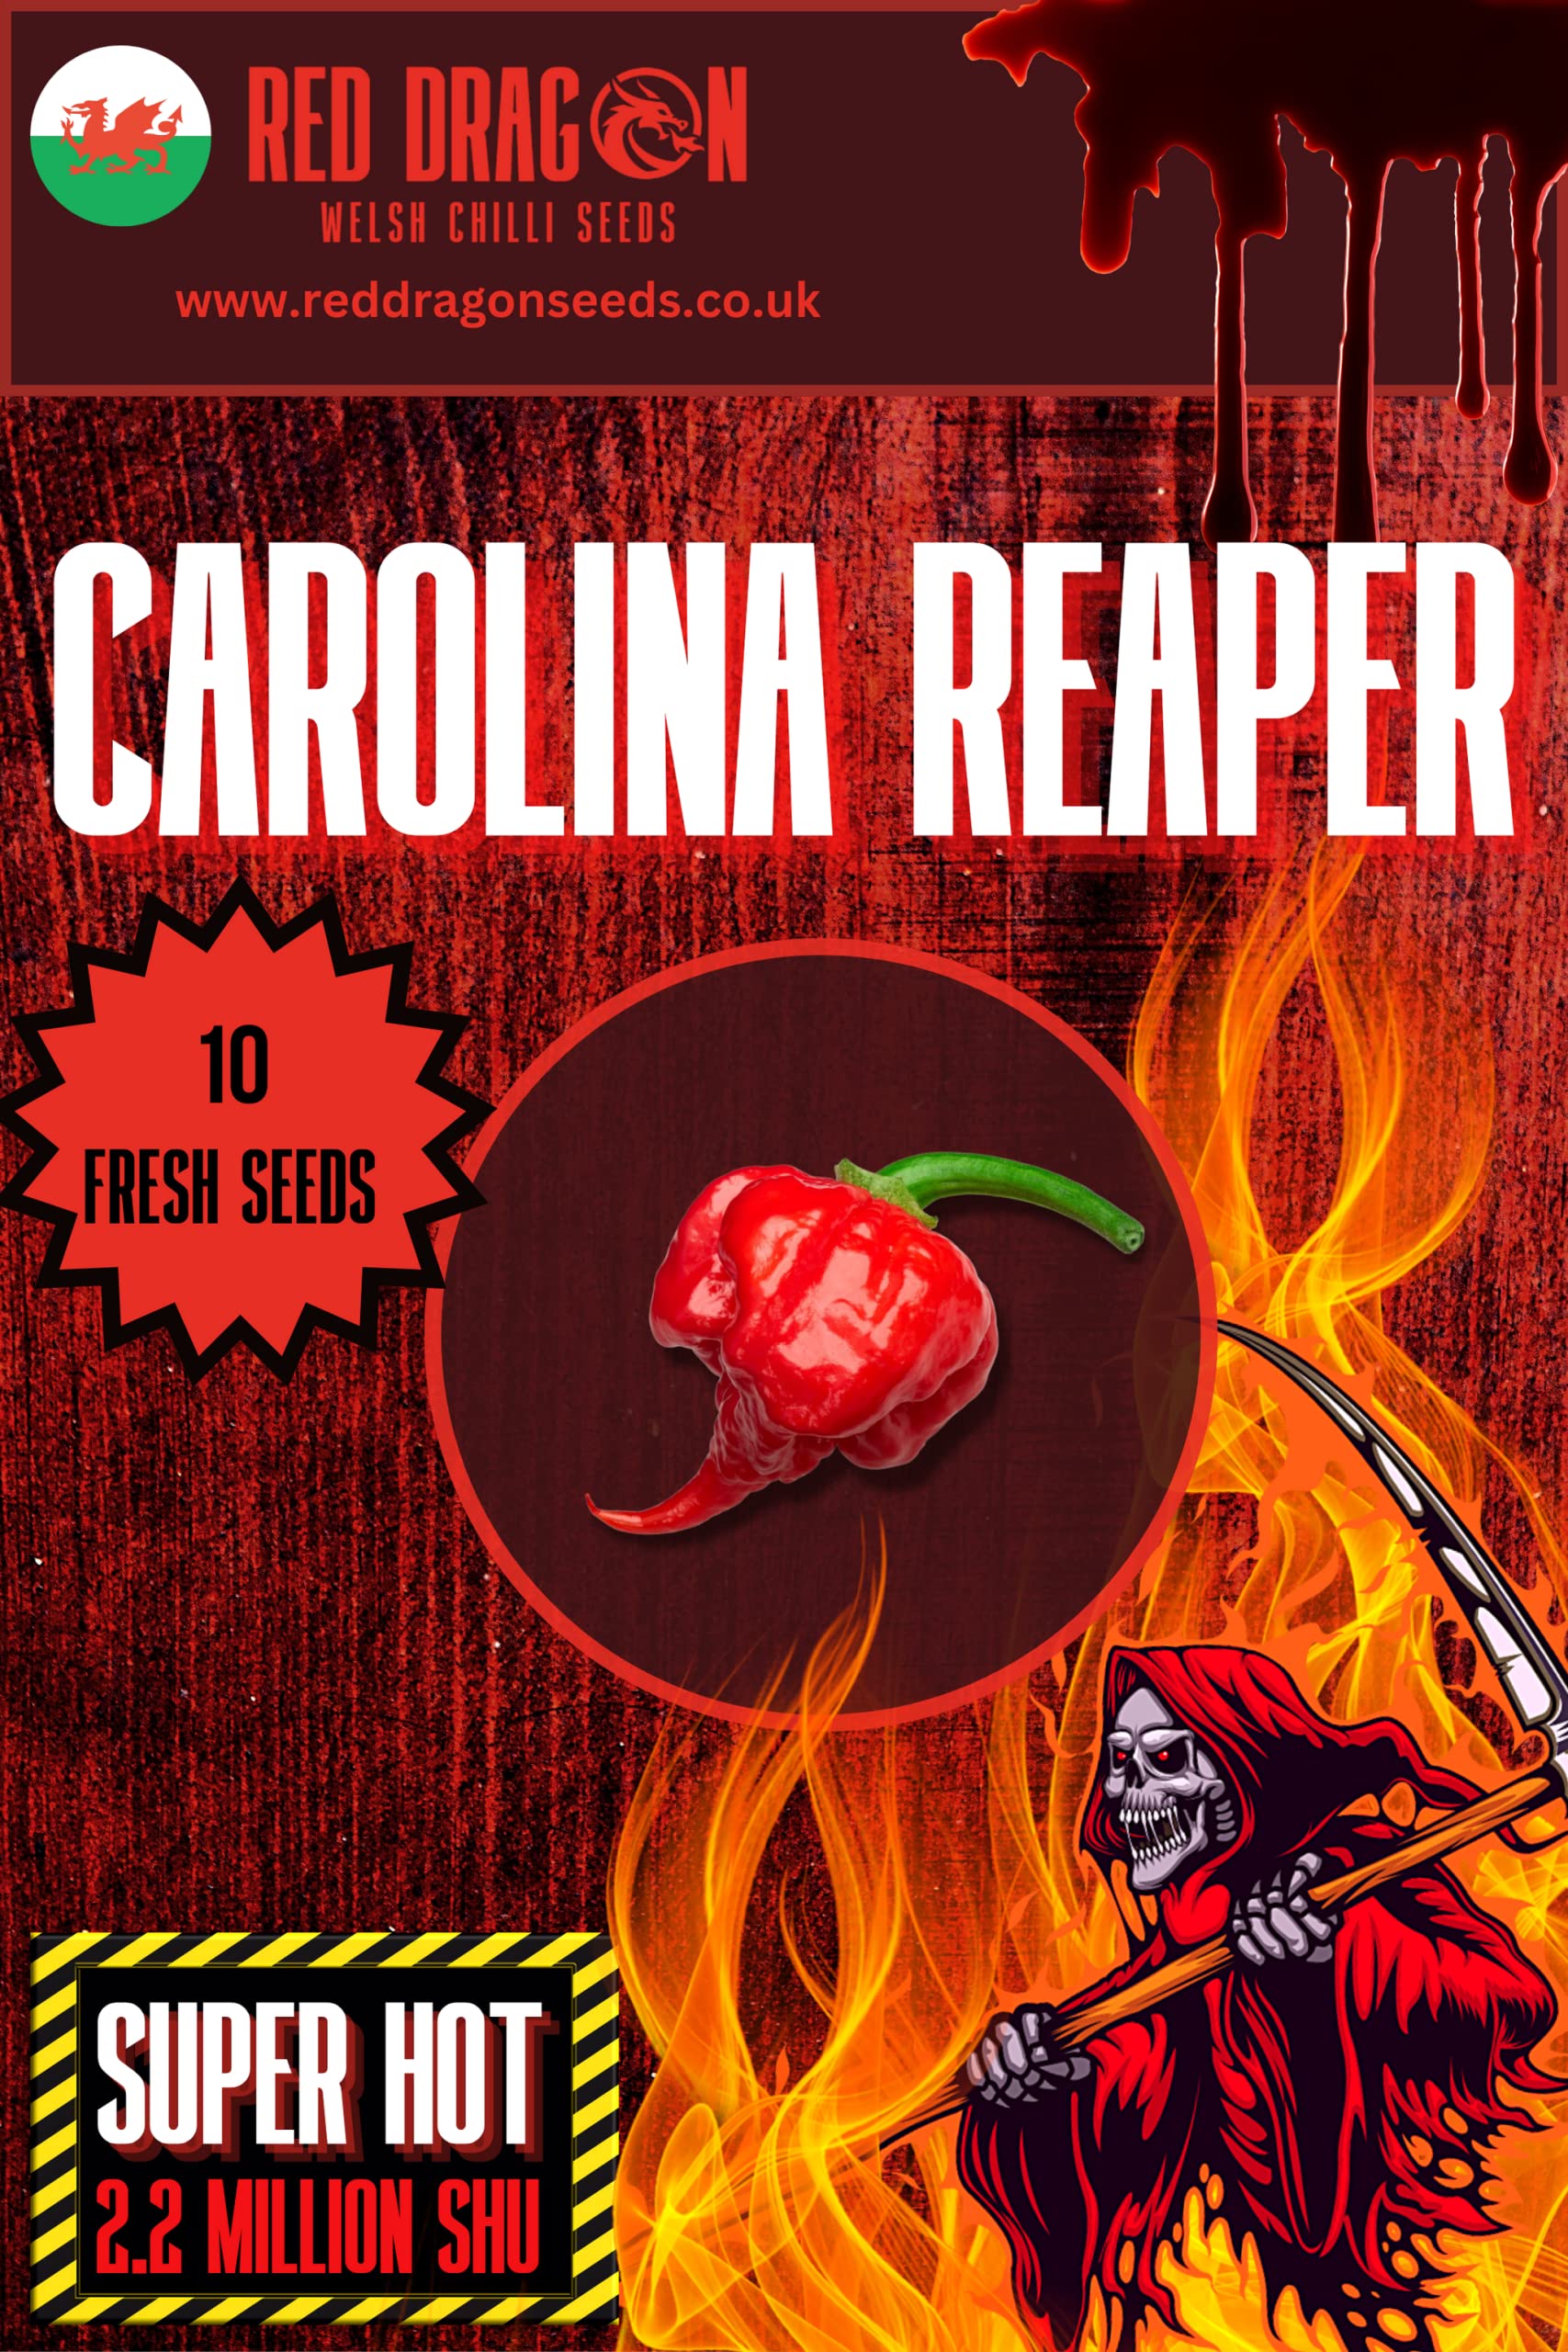 Chilli Seeds - Super Hot Chilli Seed Variety Pack - 7 Super Hot Pepper Variety Seeds Including The Carolina Reaper and Dragons Breath - 70 Super Hot Seeds (Superhot Variety Pack)